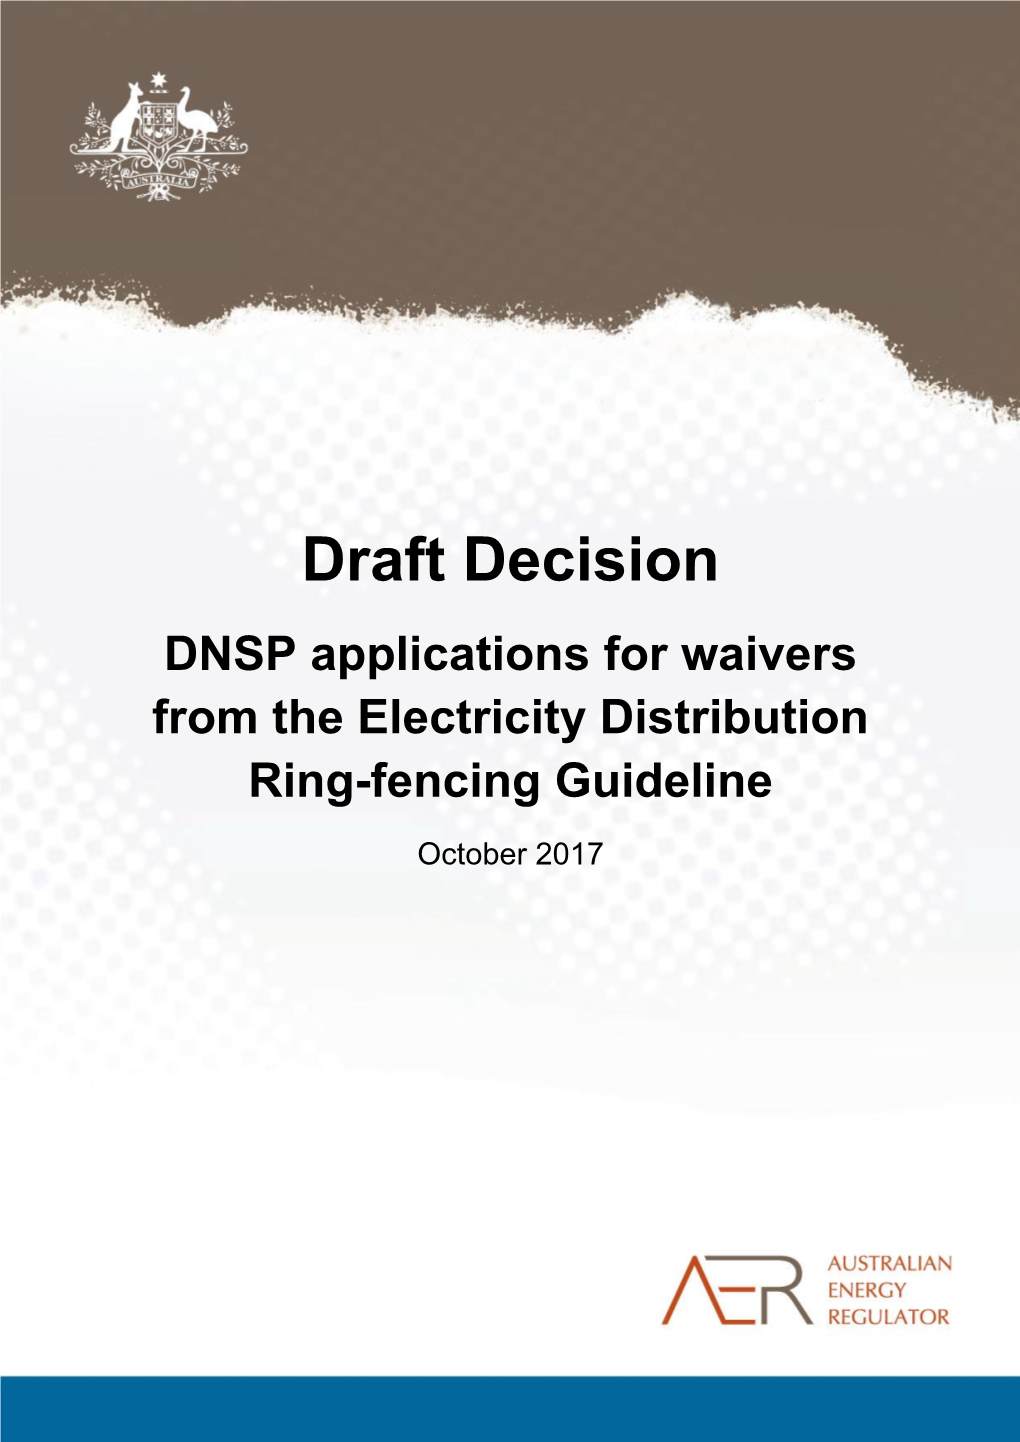 Draft Decision DNSP Applications for Waivers from the Electricity Distribution Ring-Fencing Guideline